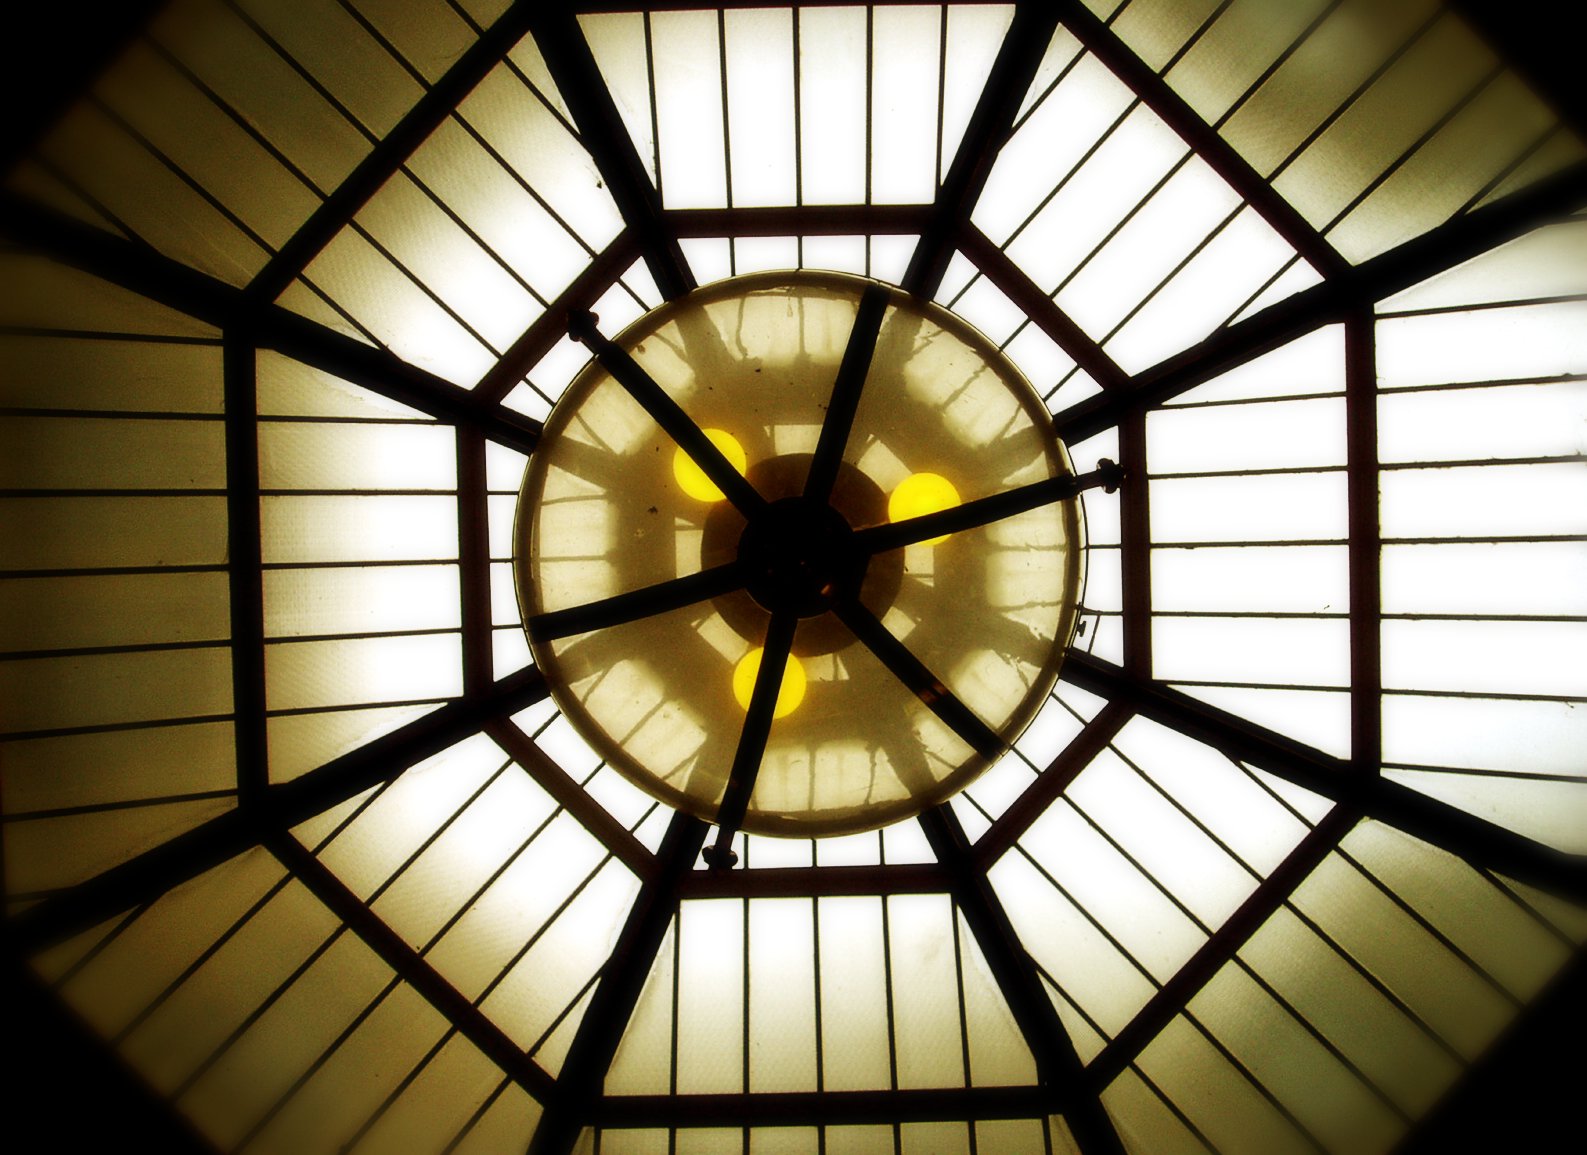 a view up into the center of a structure with a circular shaped ceiling light